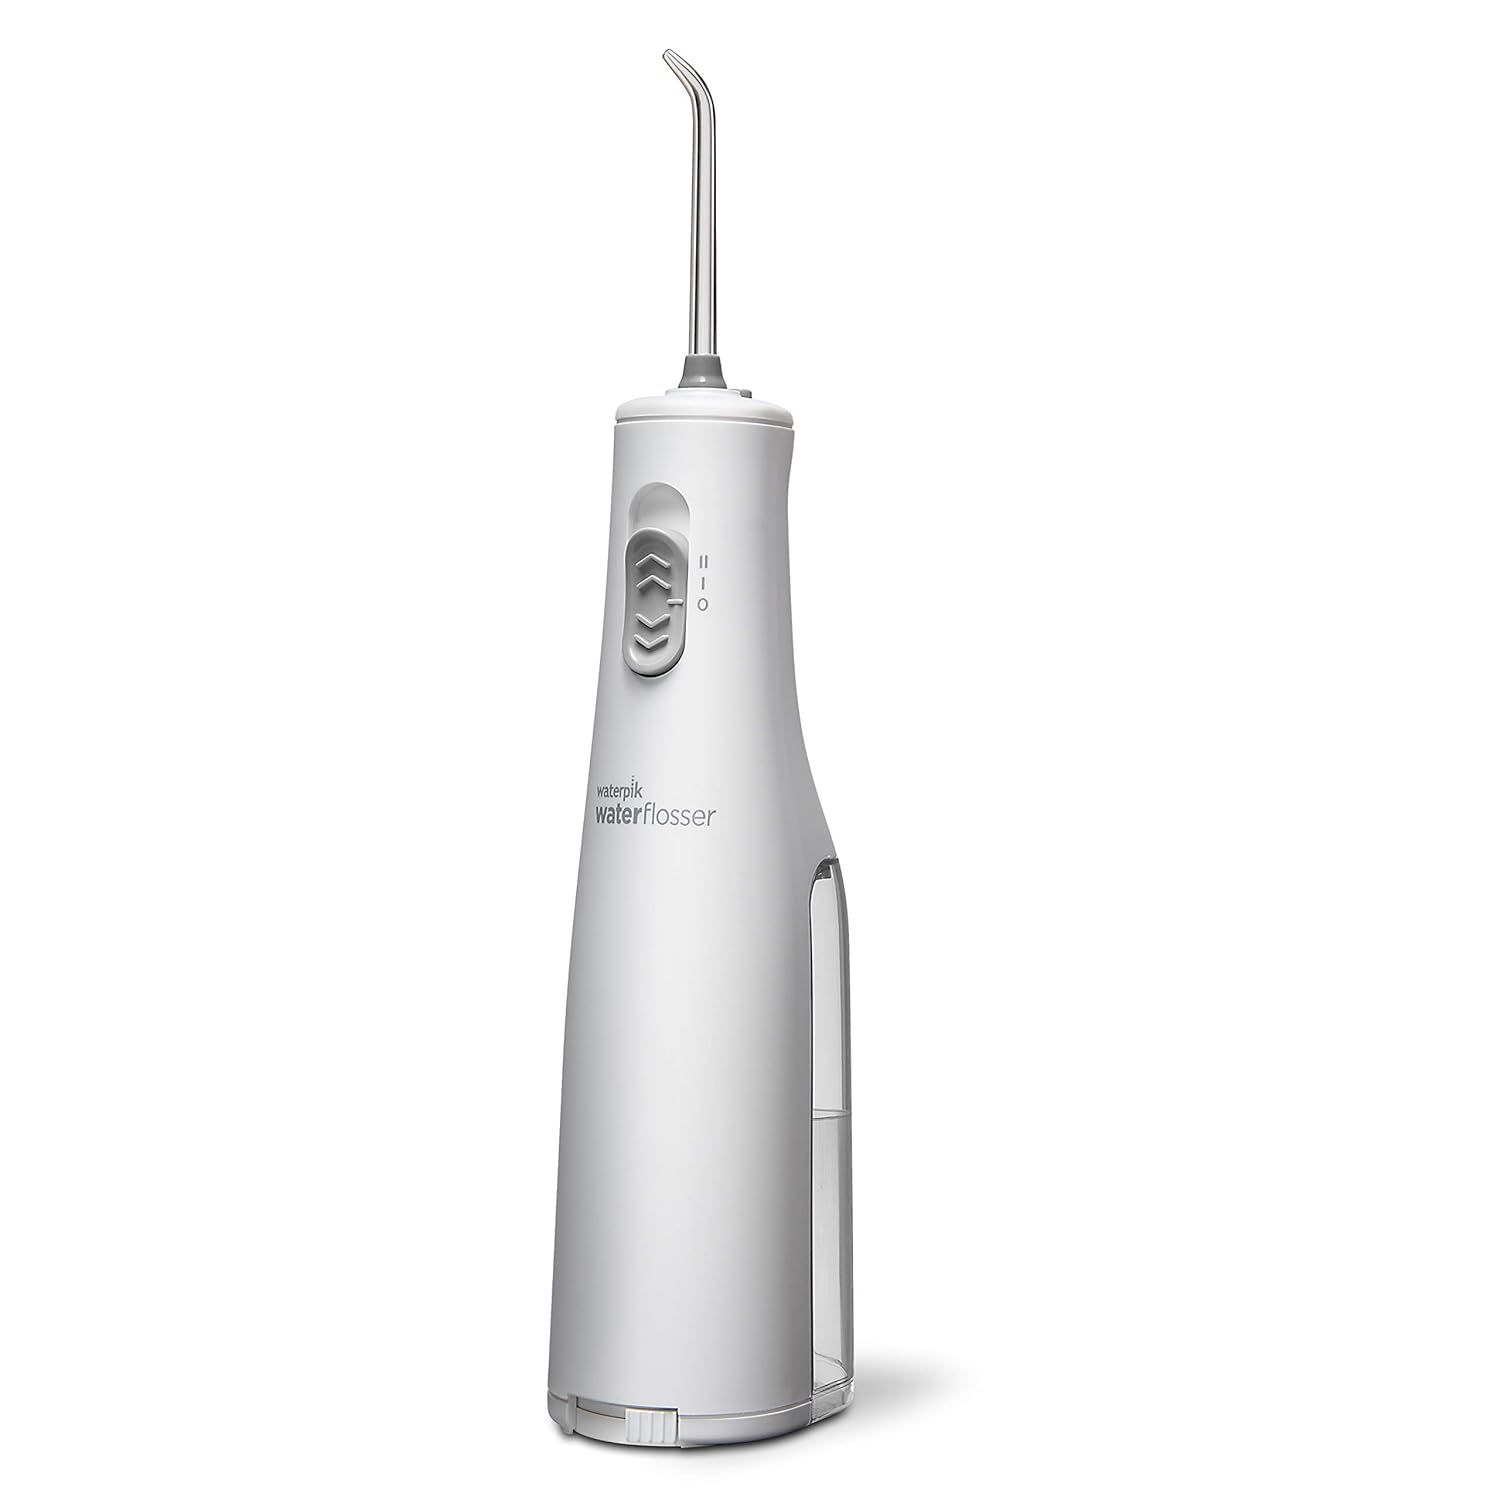 Waterpik Cordless Water Flosser, Battery Operated & Portable for Travel & Home, ADA Accepted Cord... | Amazon (US)